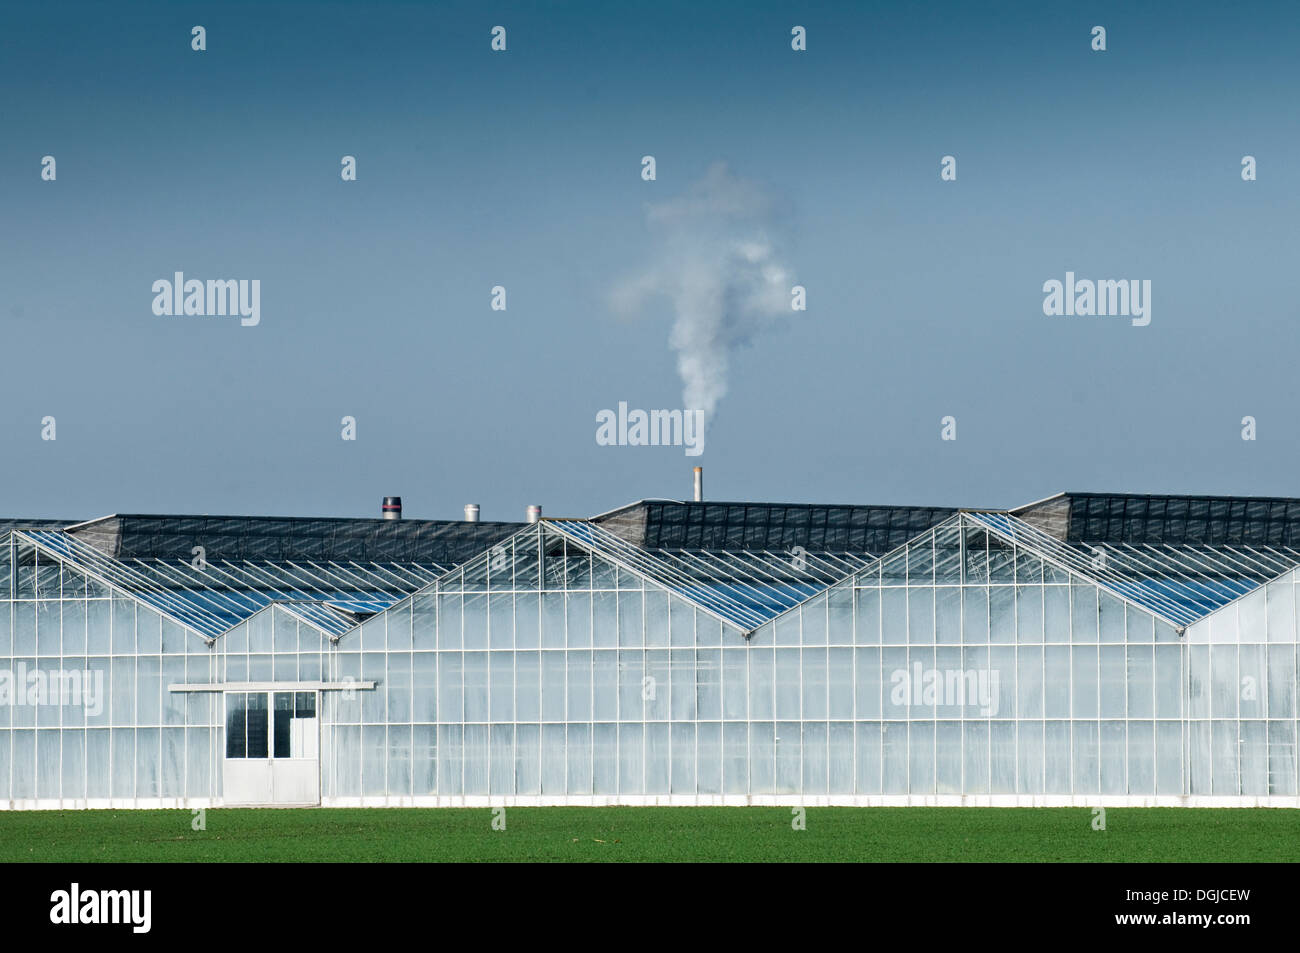 Smoke from large industrial greenhouse Stock Photo